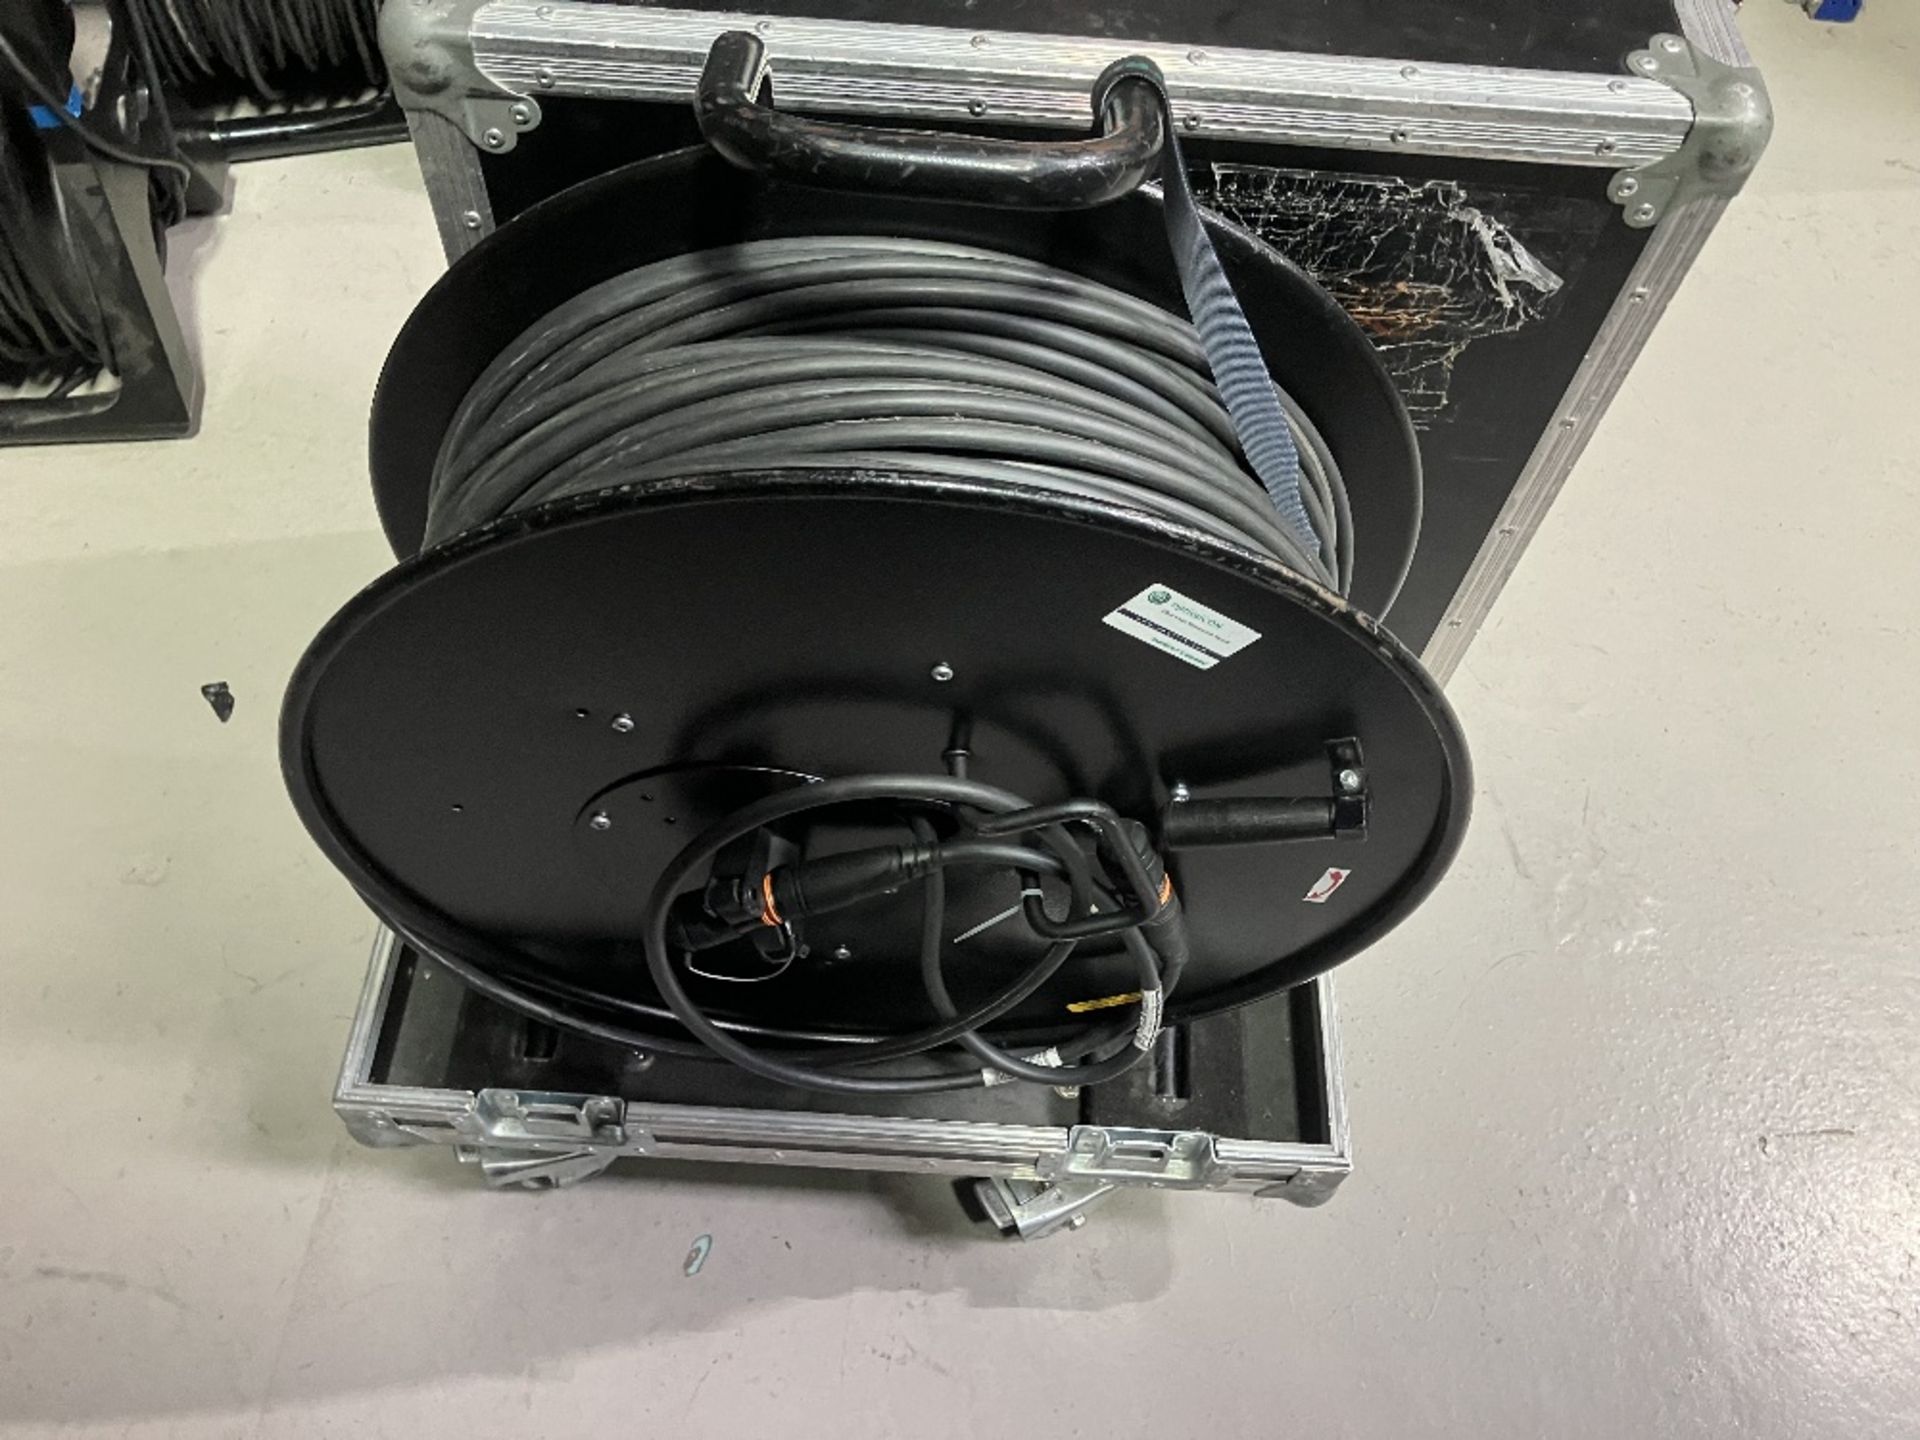 135m 12-Way Fibre Cable Reel With Heavy Duty Mobile Flight case - Image 6 of 9